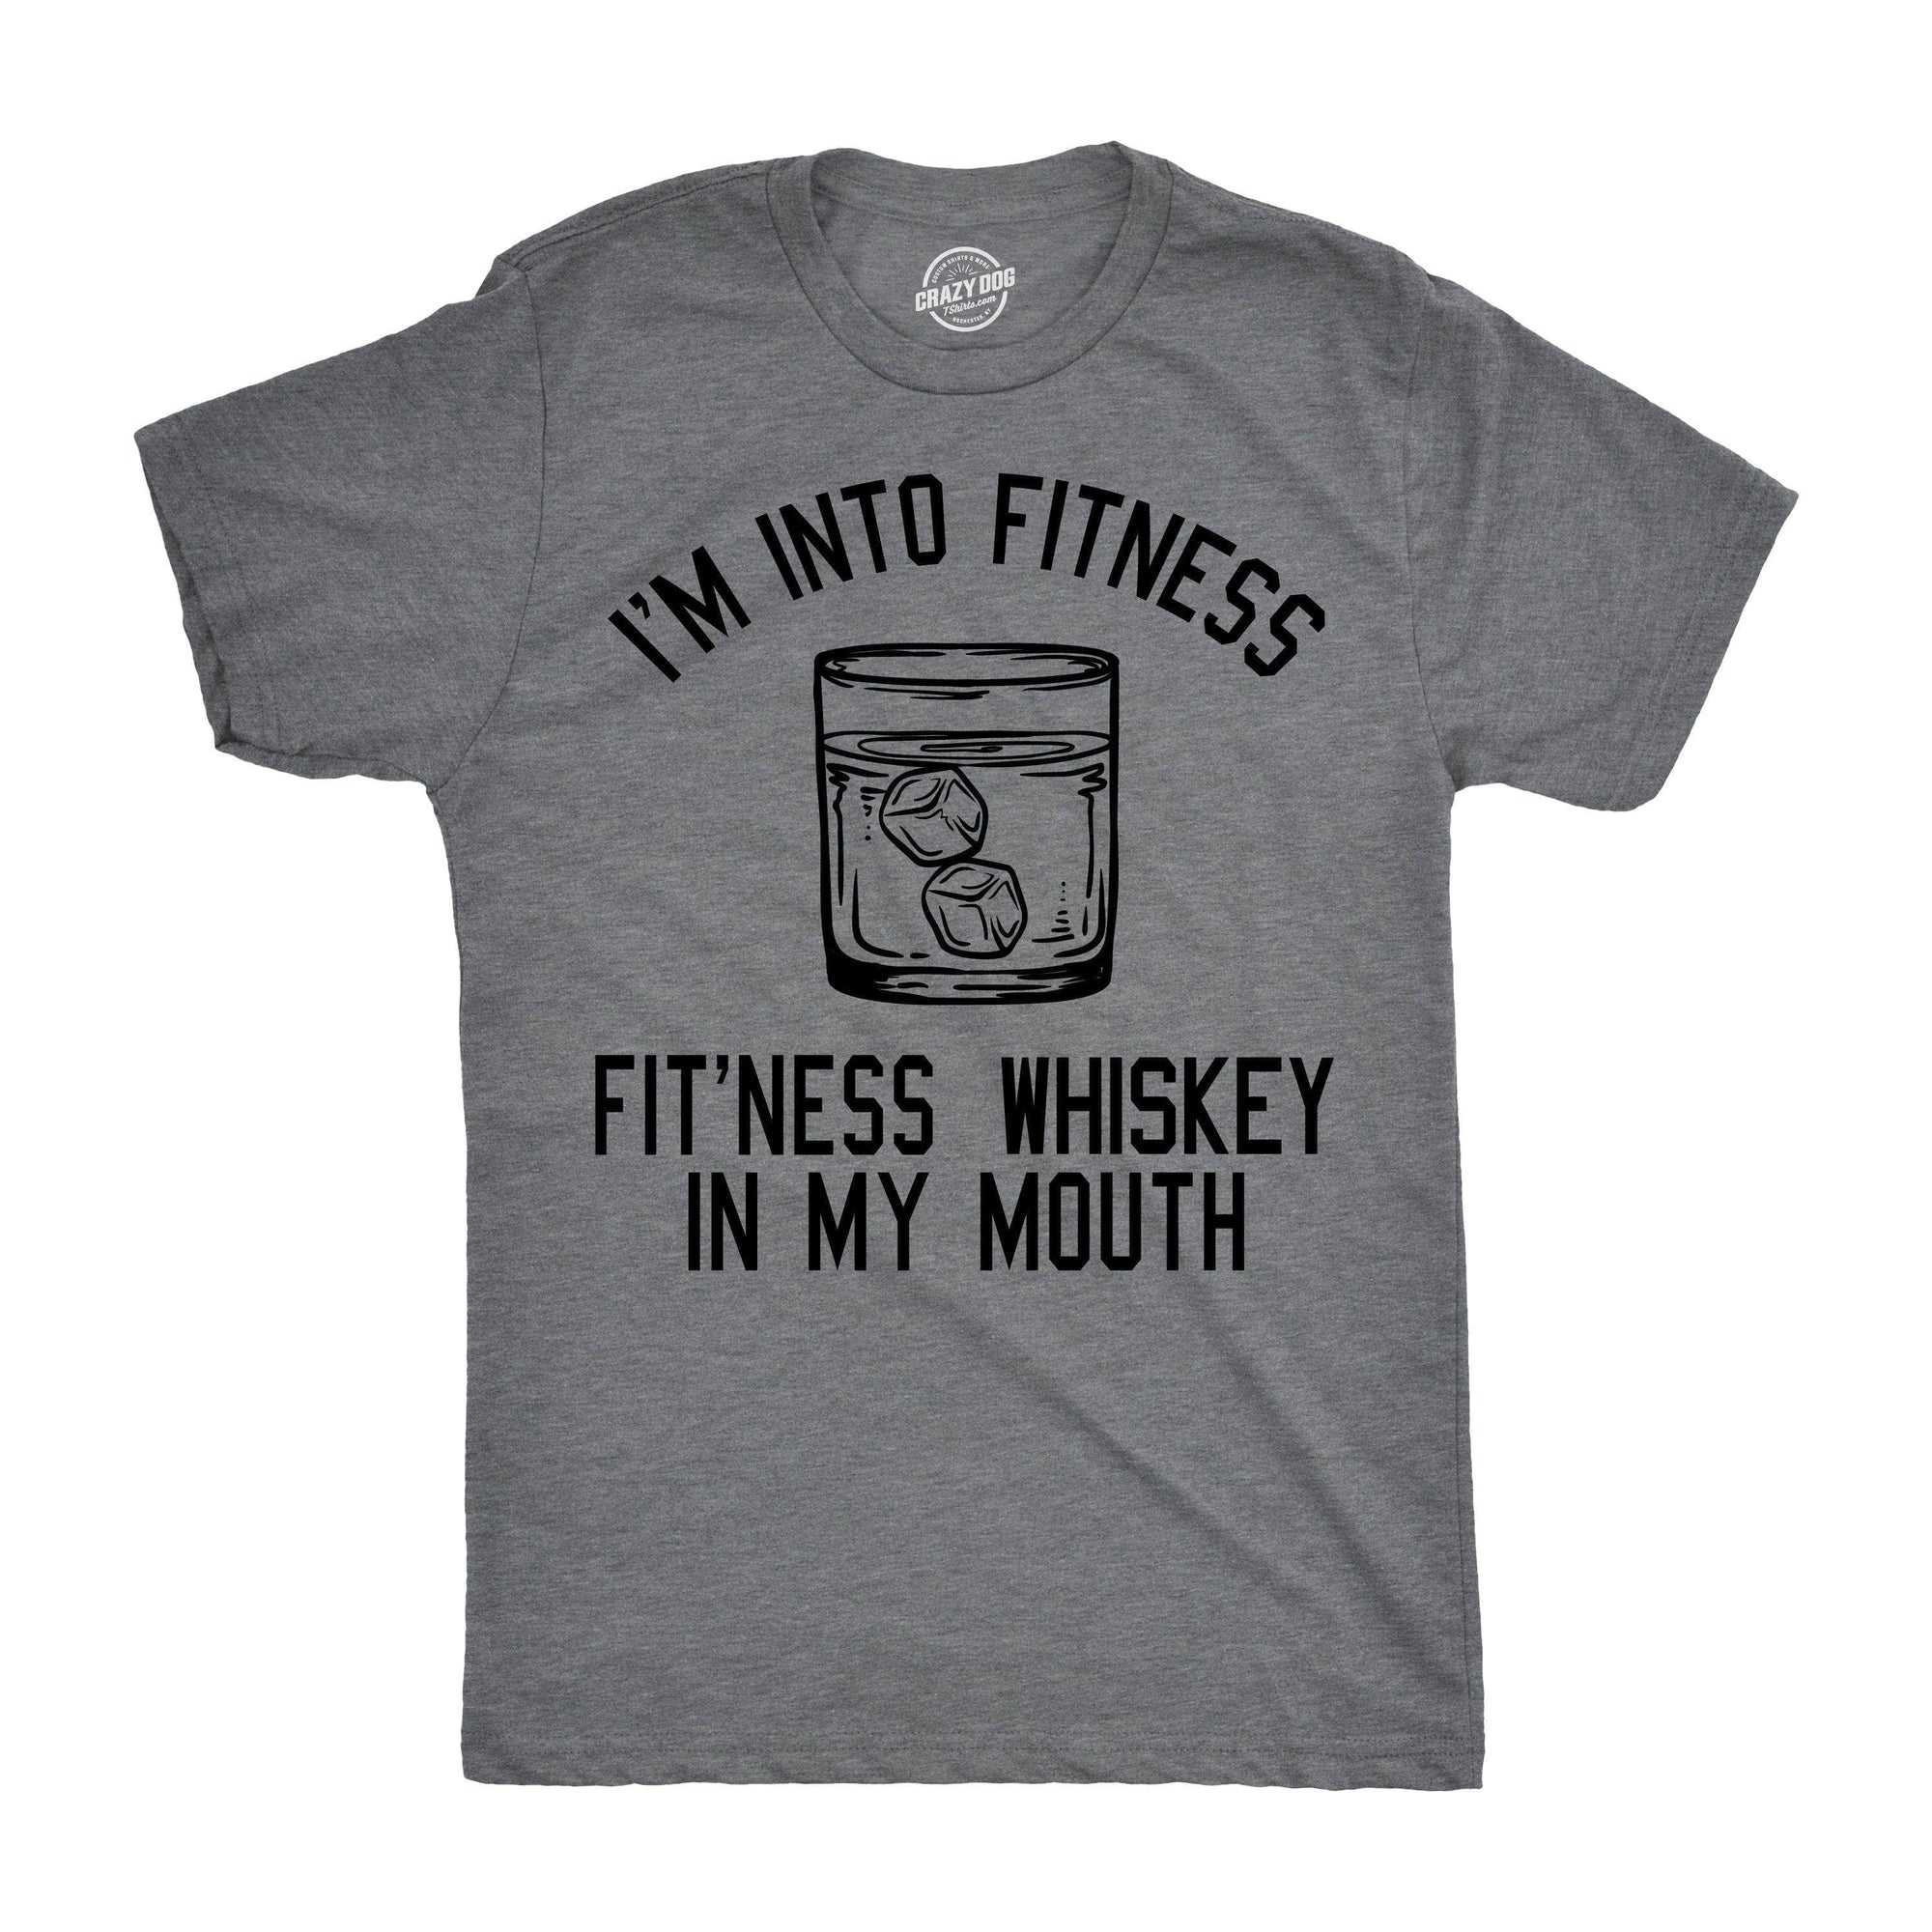 Fitness Whiskey In My Mouth Men's Tshirt  -  Crazy Dog T-Shirts